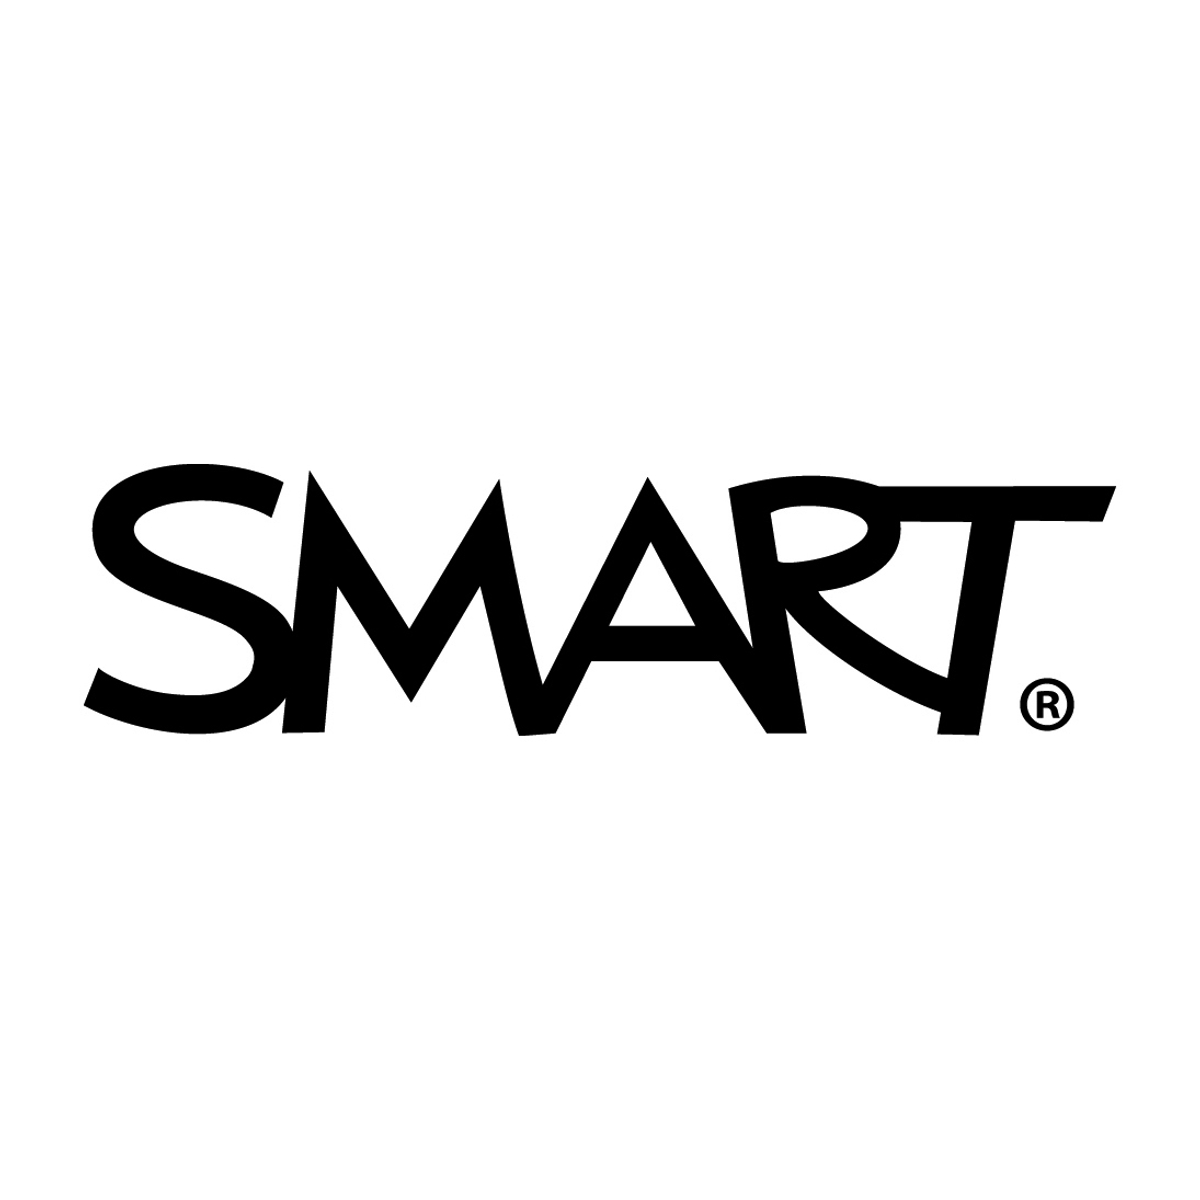 ED-SW-7 SMART Learning Suite - 7 Year